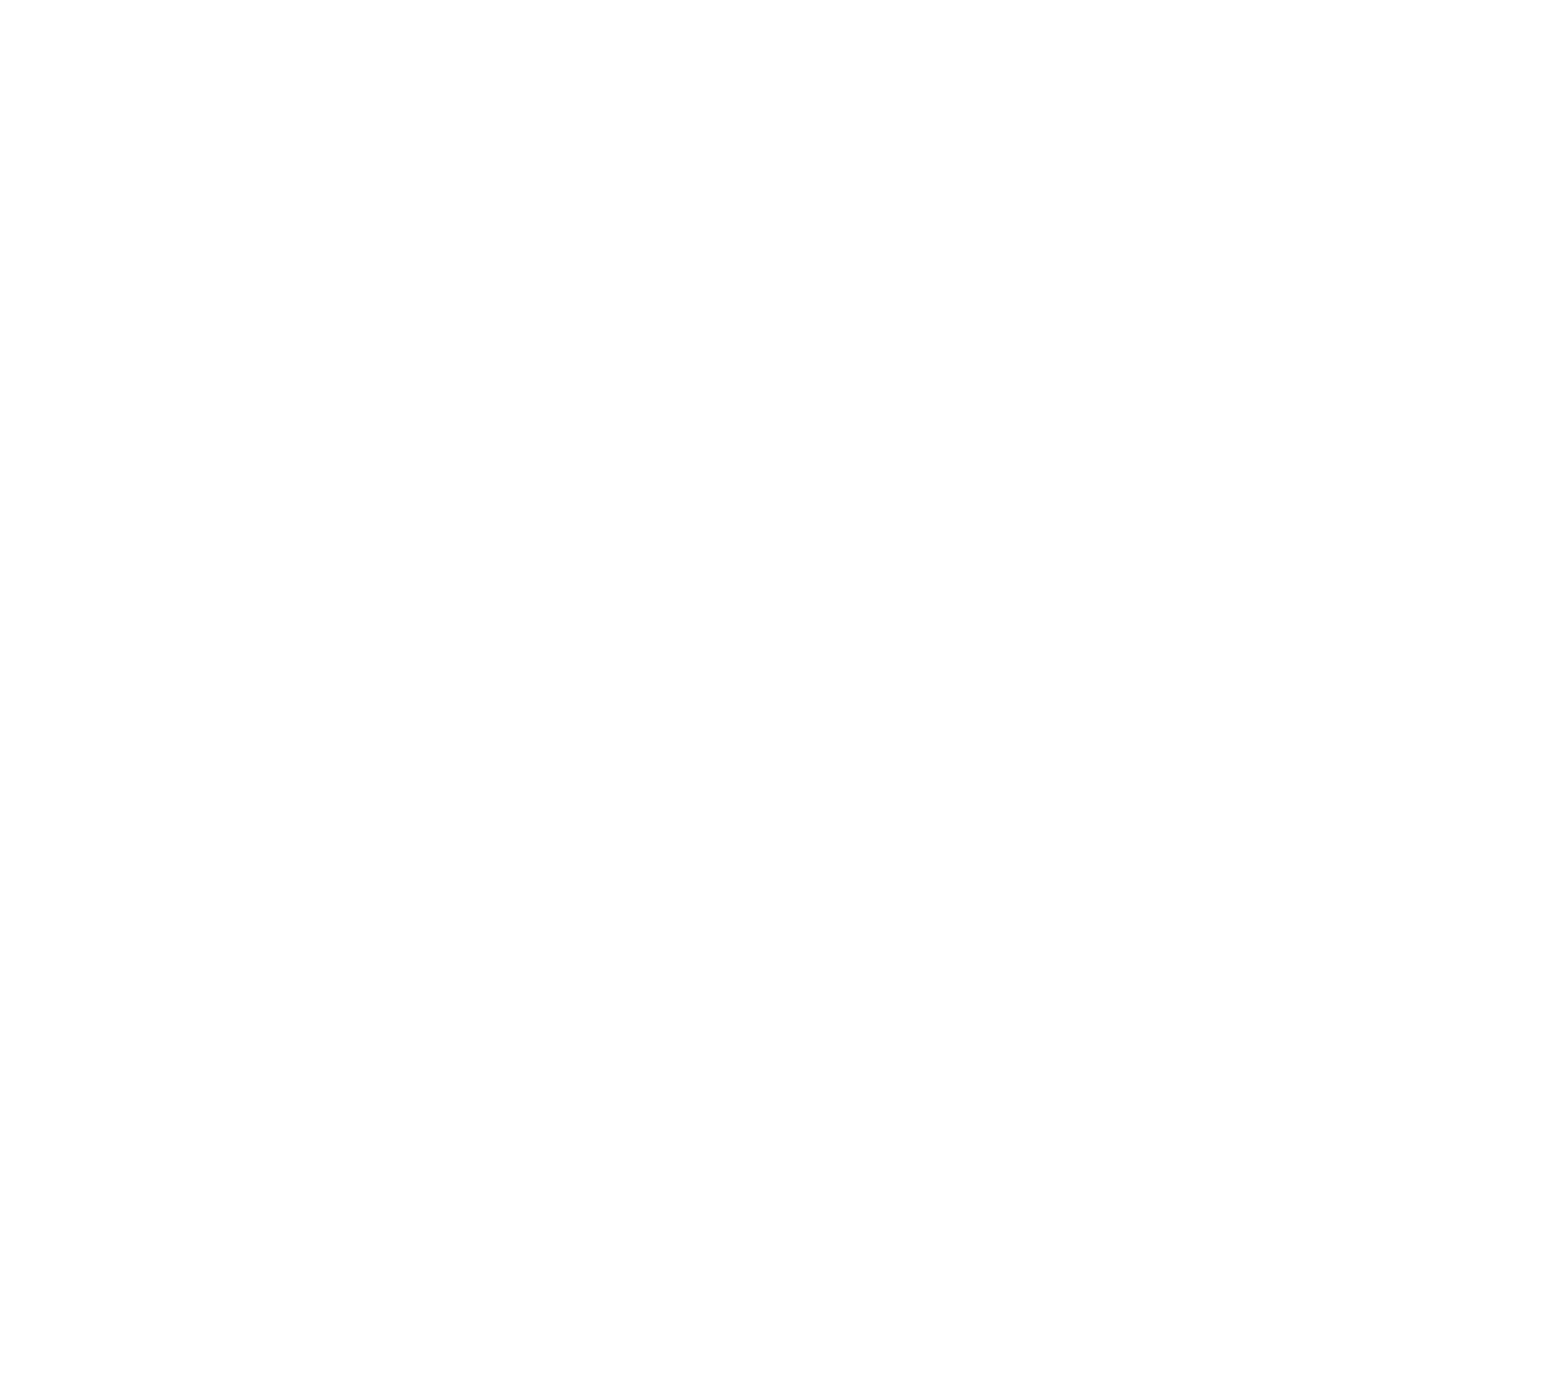 [Translate to Englisch:] Recycling Kontor